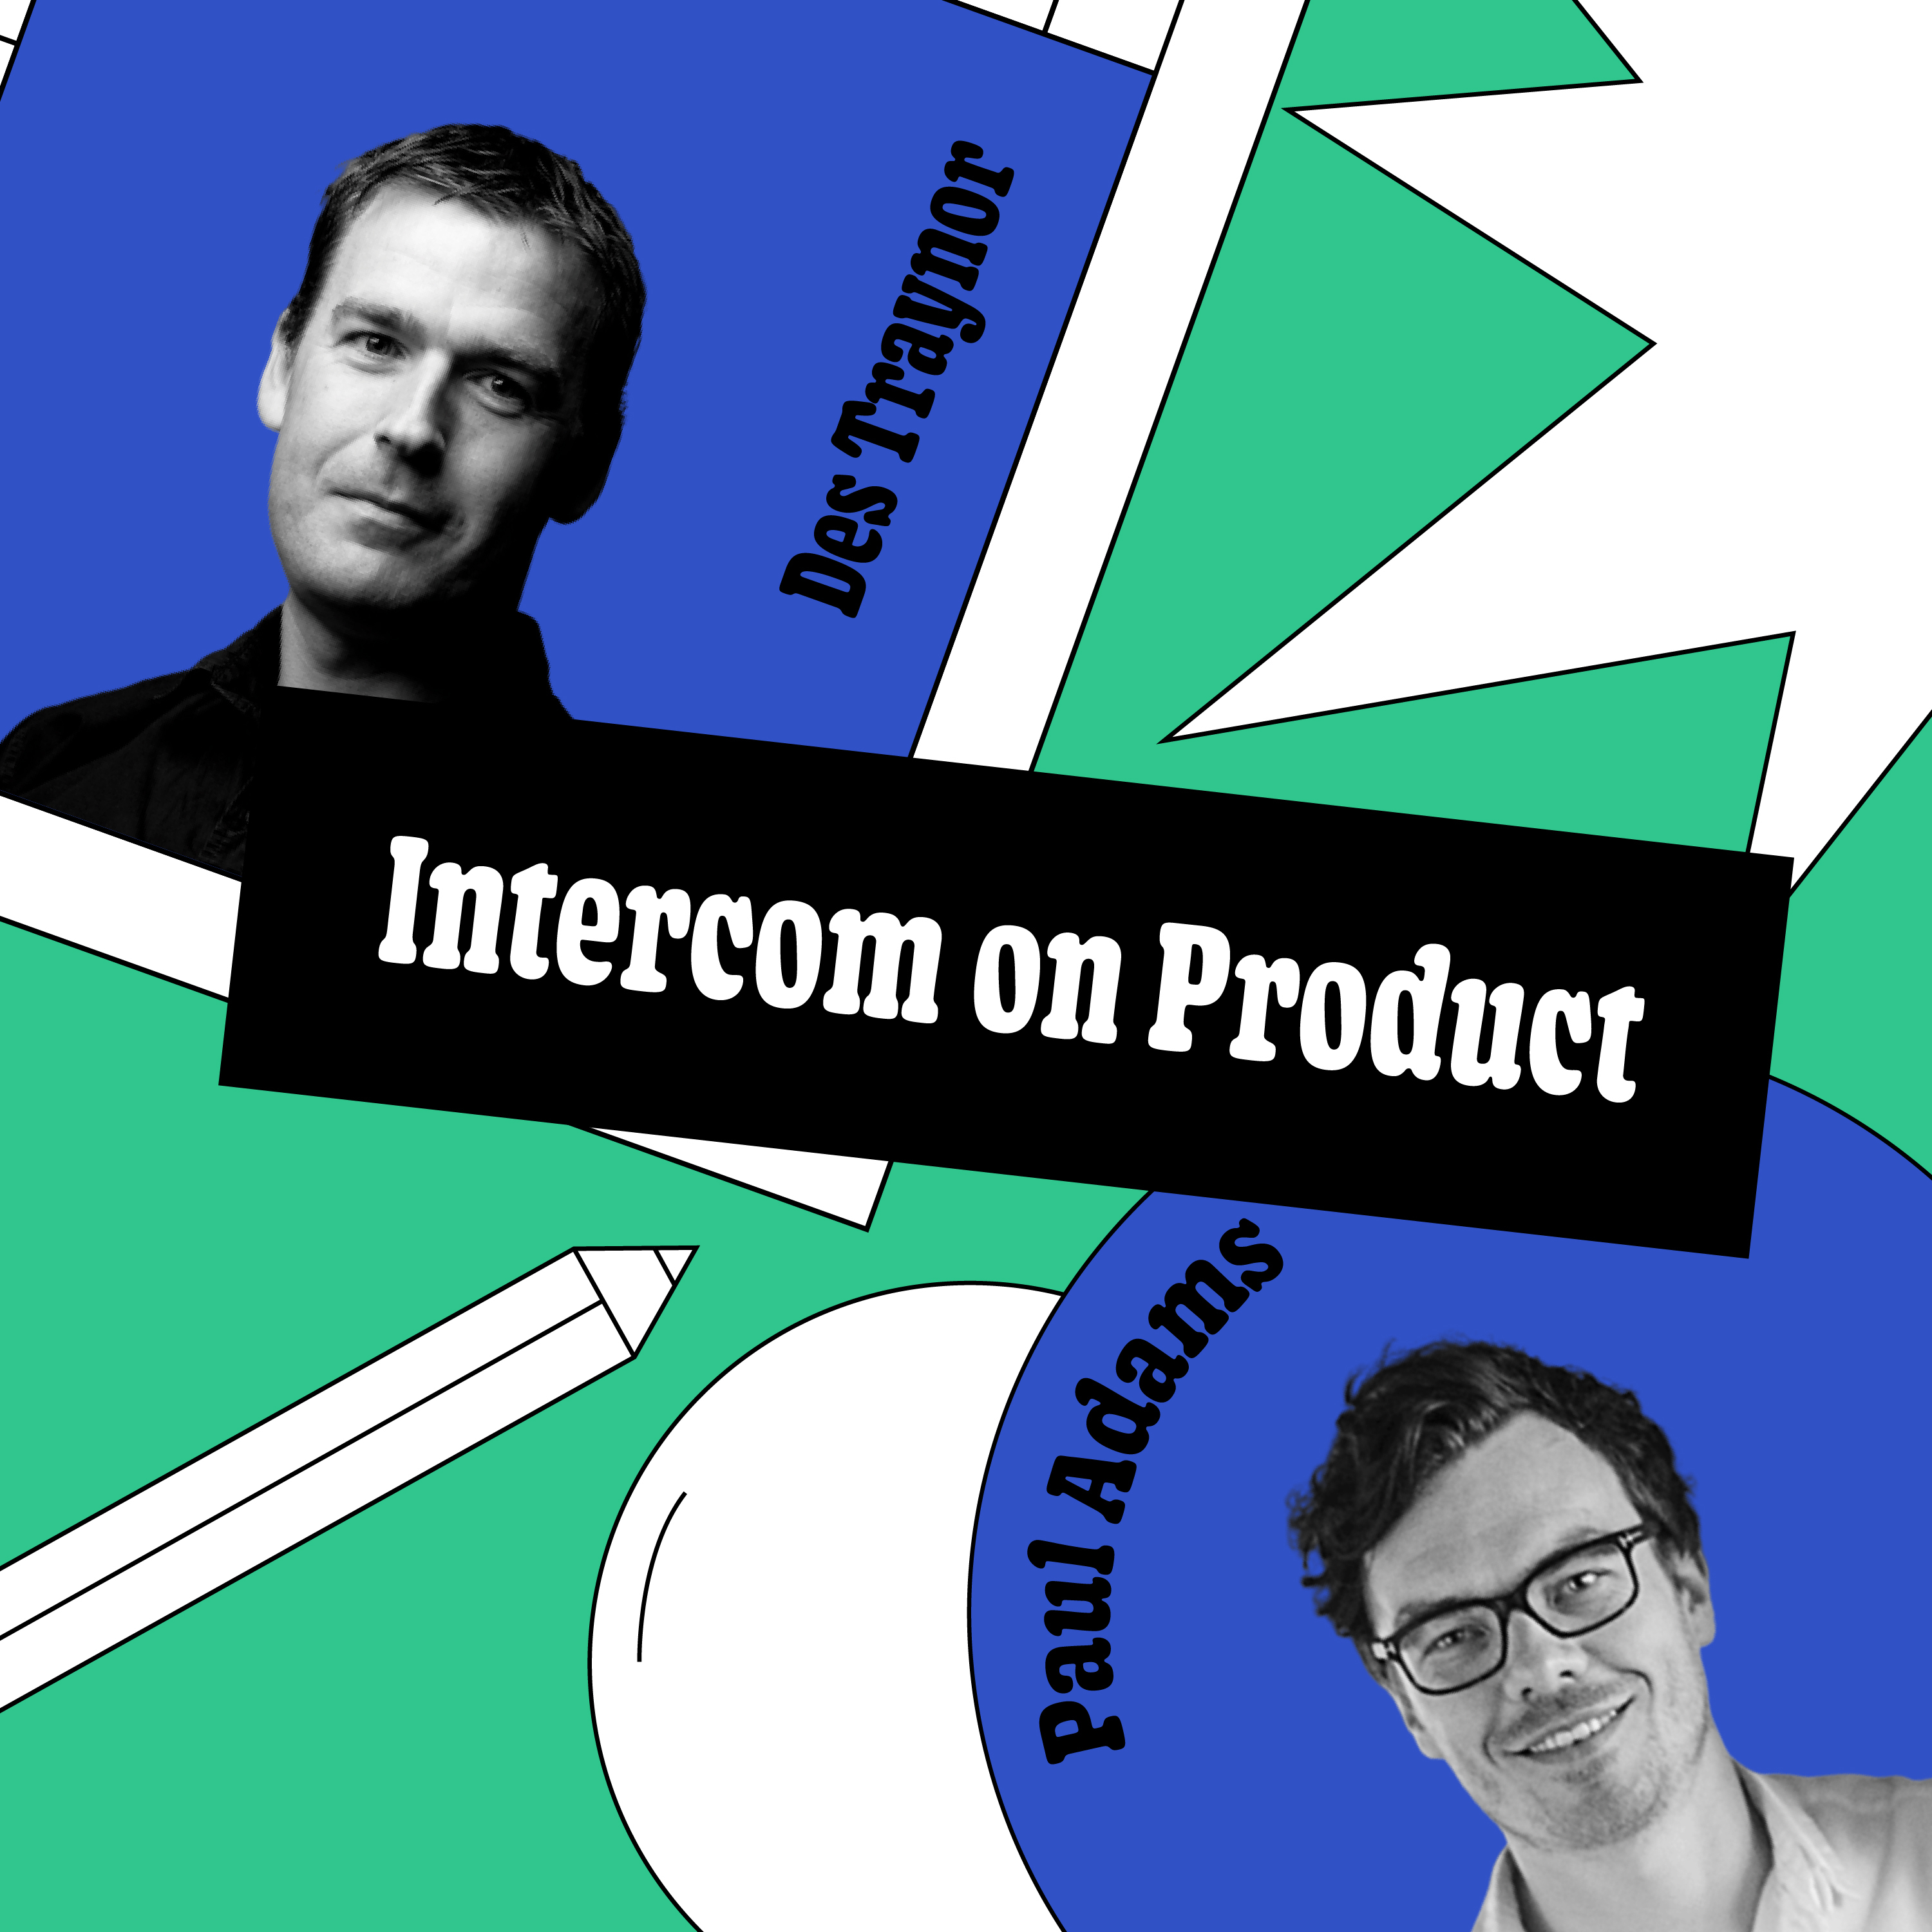 Intercom on Product: One for the roadmap